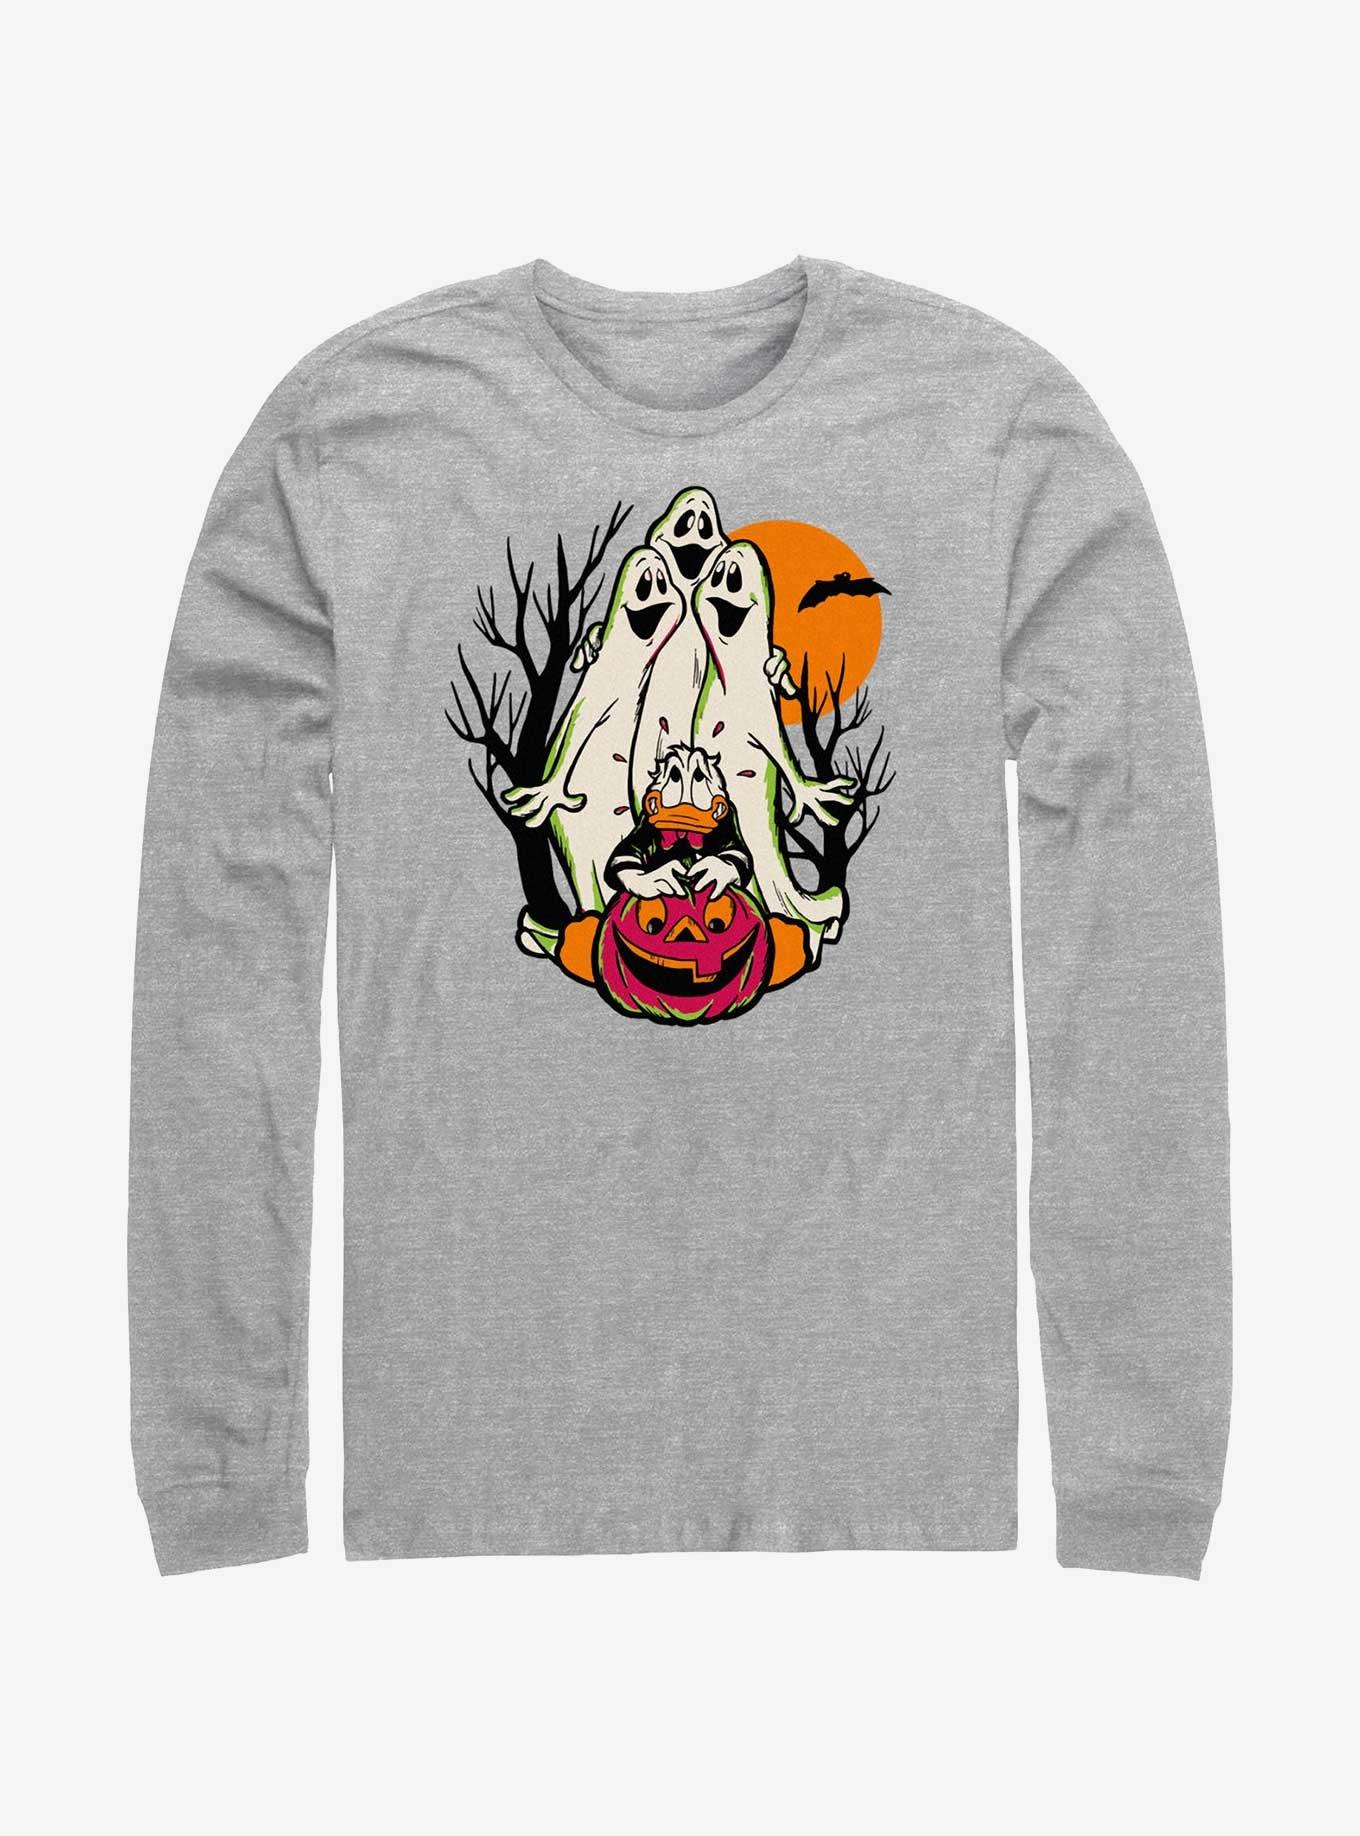 Disney100 Halloween Spooky Ghosts Scared Donald Long-Sleeve T-Shirt, ATH HTR, hi-res